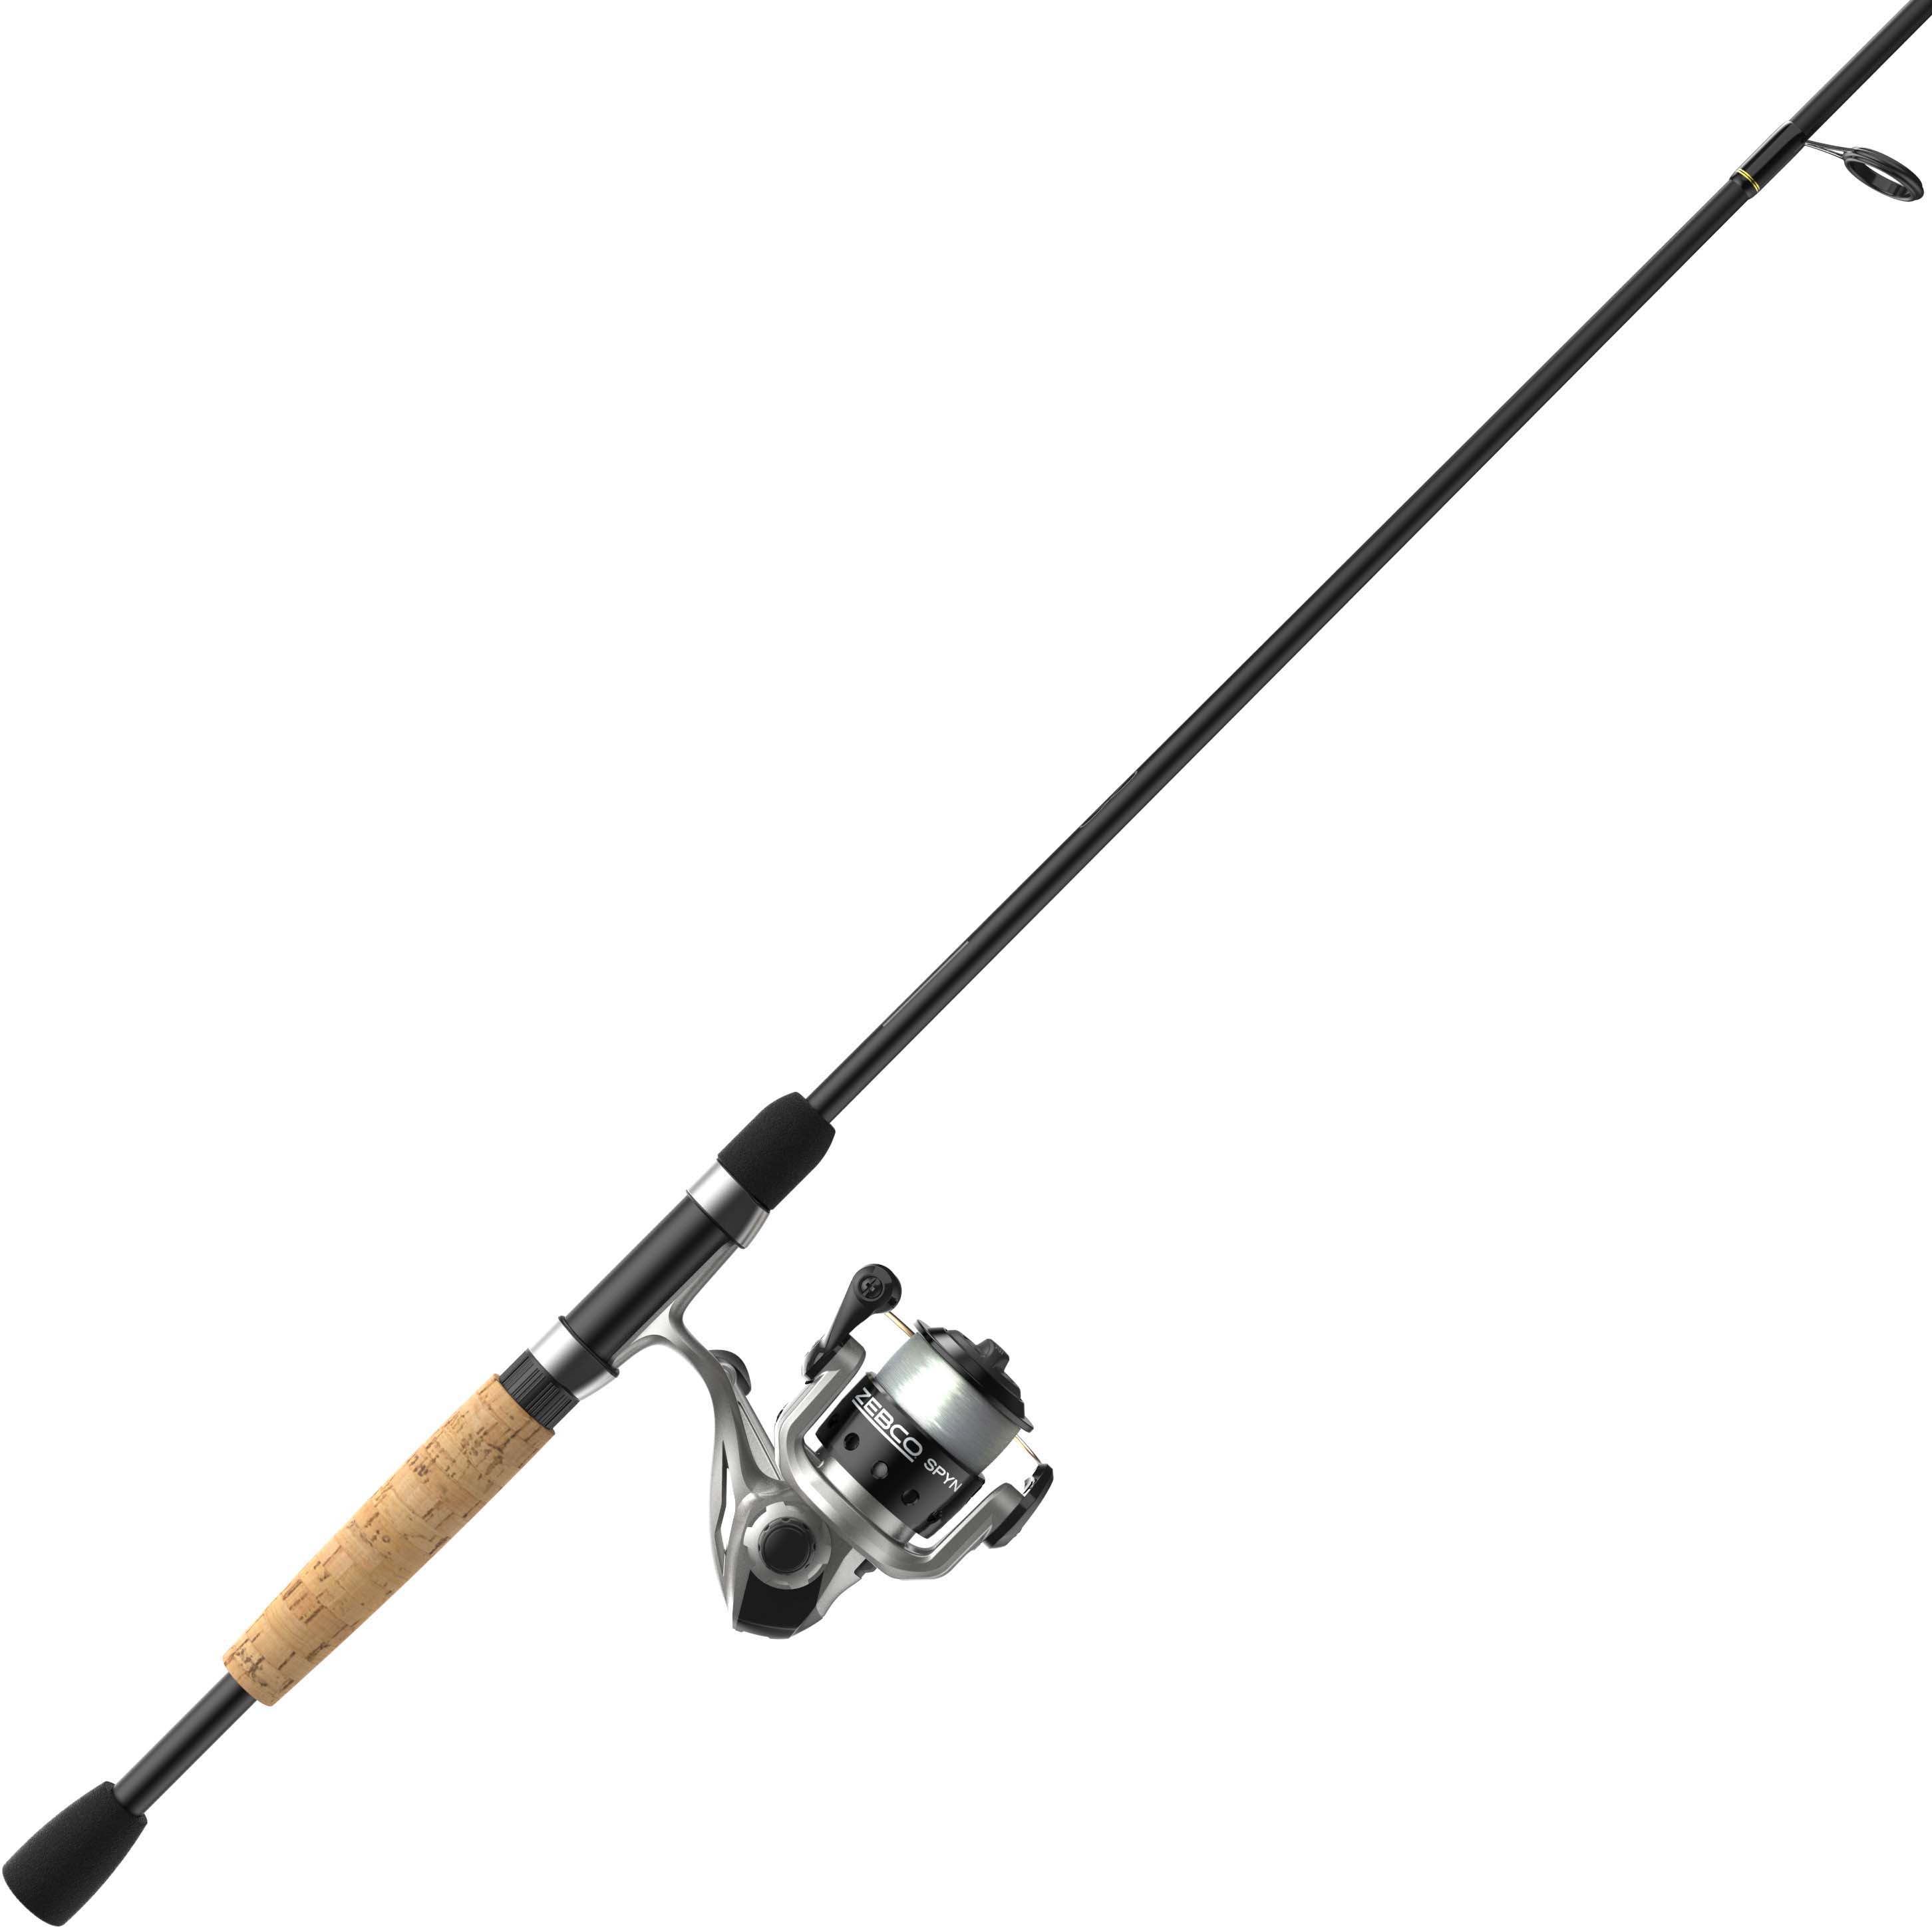 Zebco Spyn Spinning Combo Rod  26% Off Free Shipping over $49!